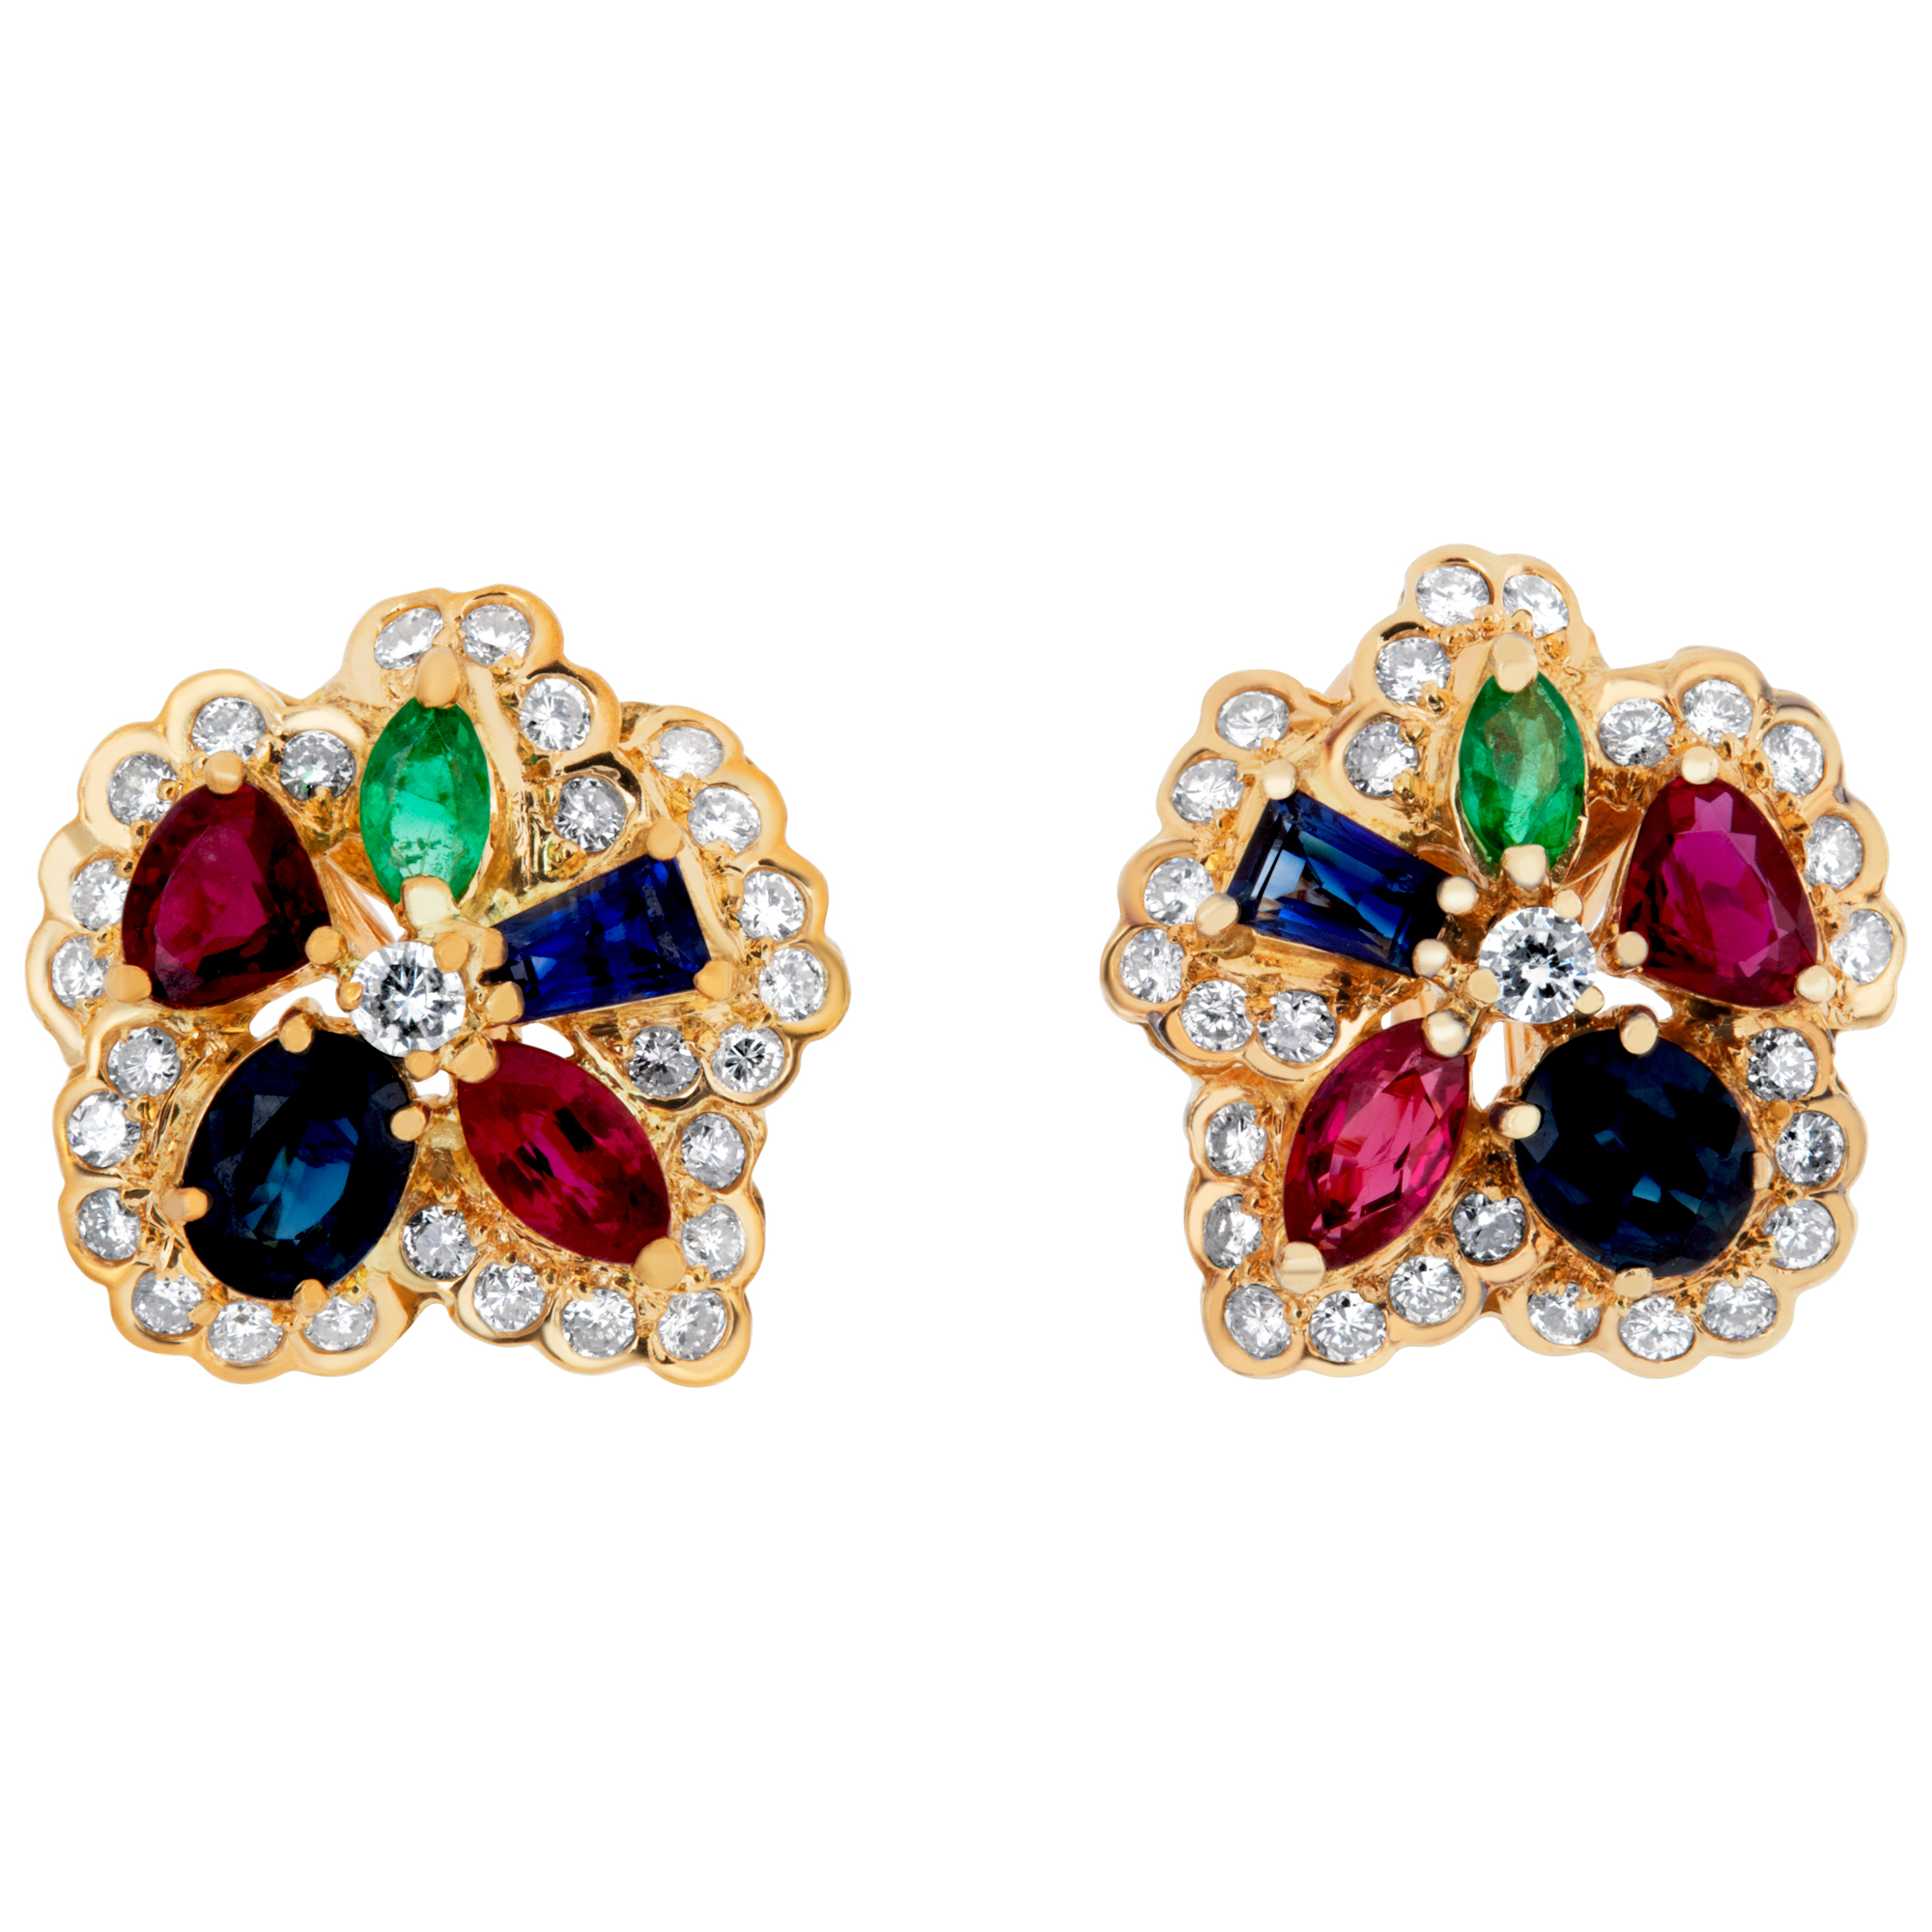 Sapphire, Ruby and Emerald cluster earrings with diamond accents (Stones)